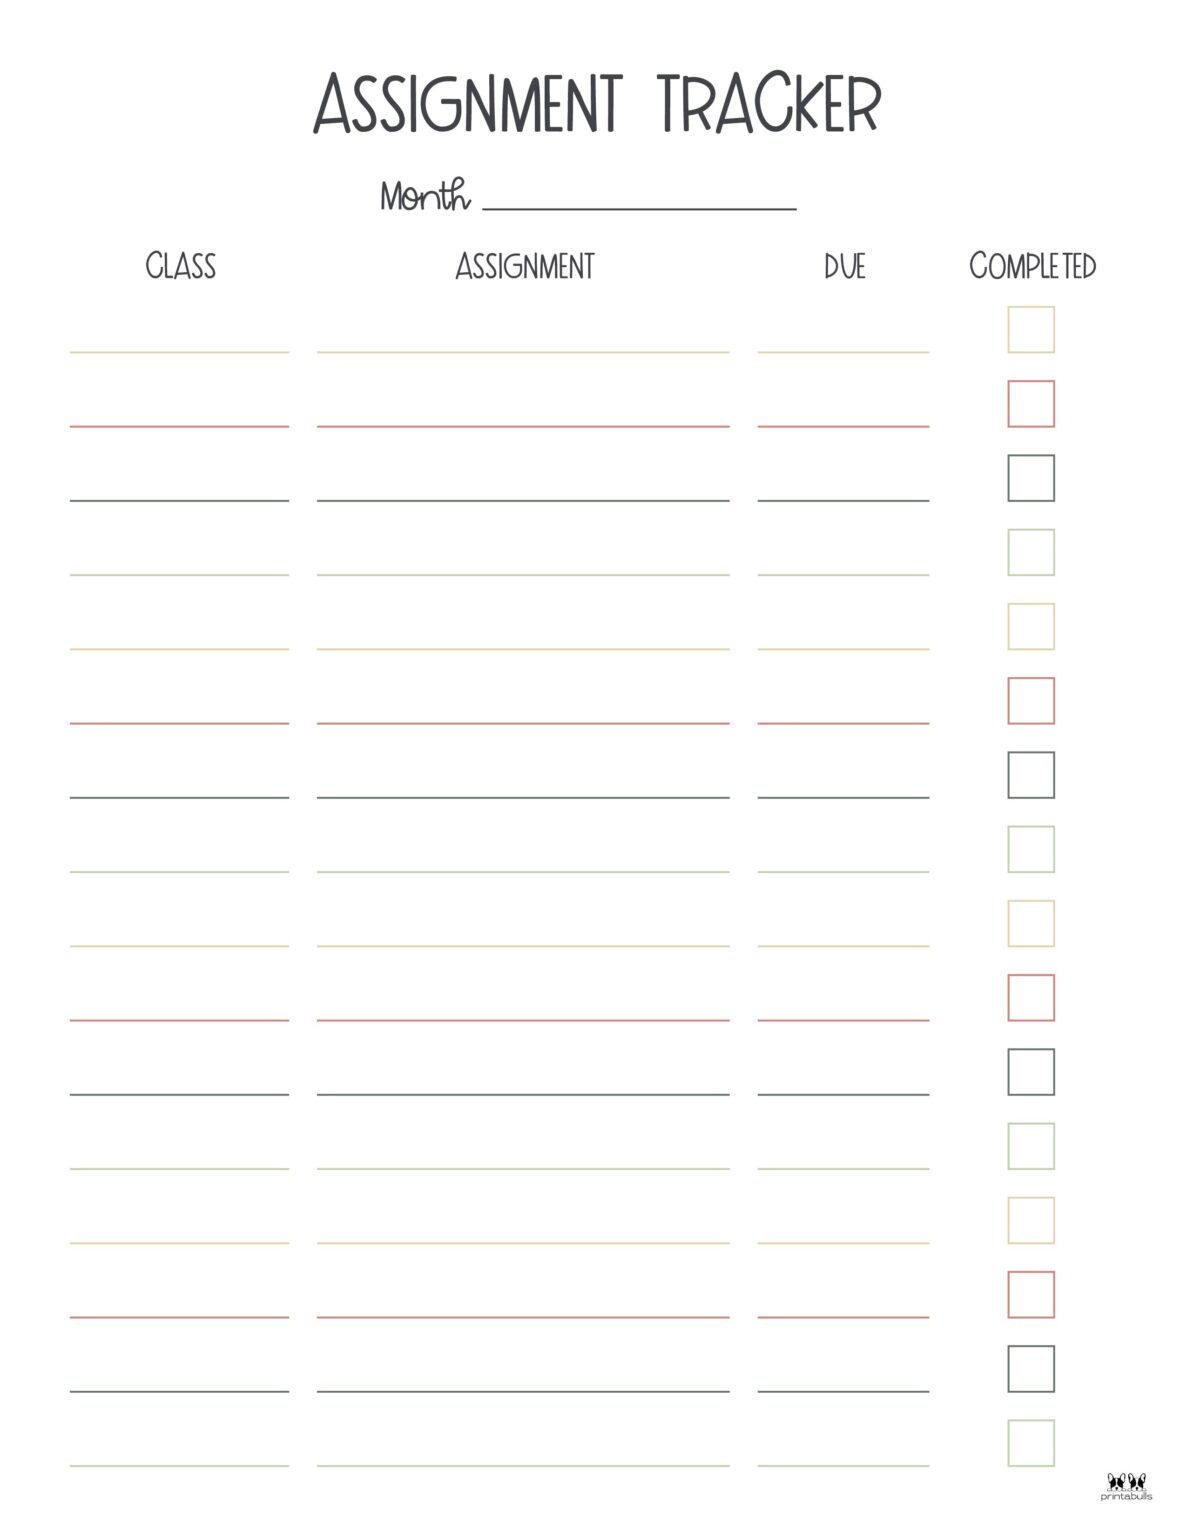 printable assignment tracker